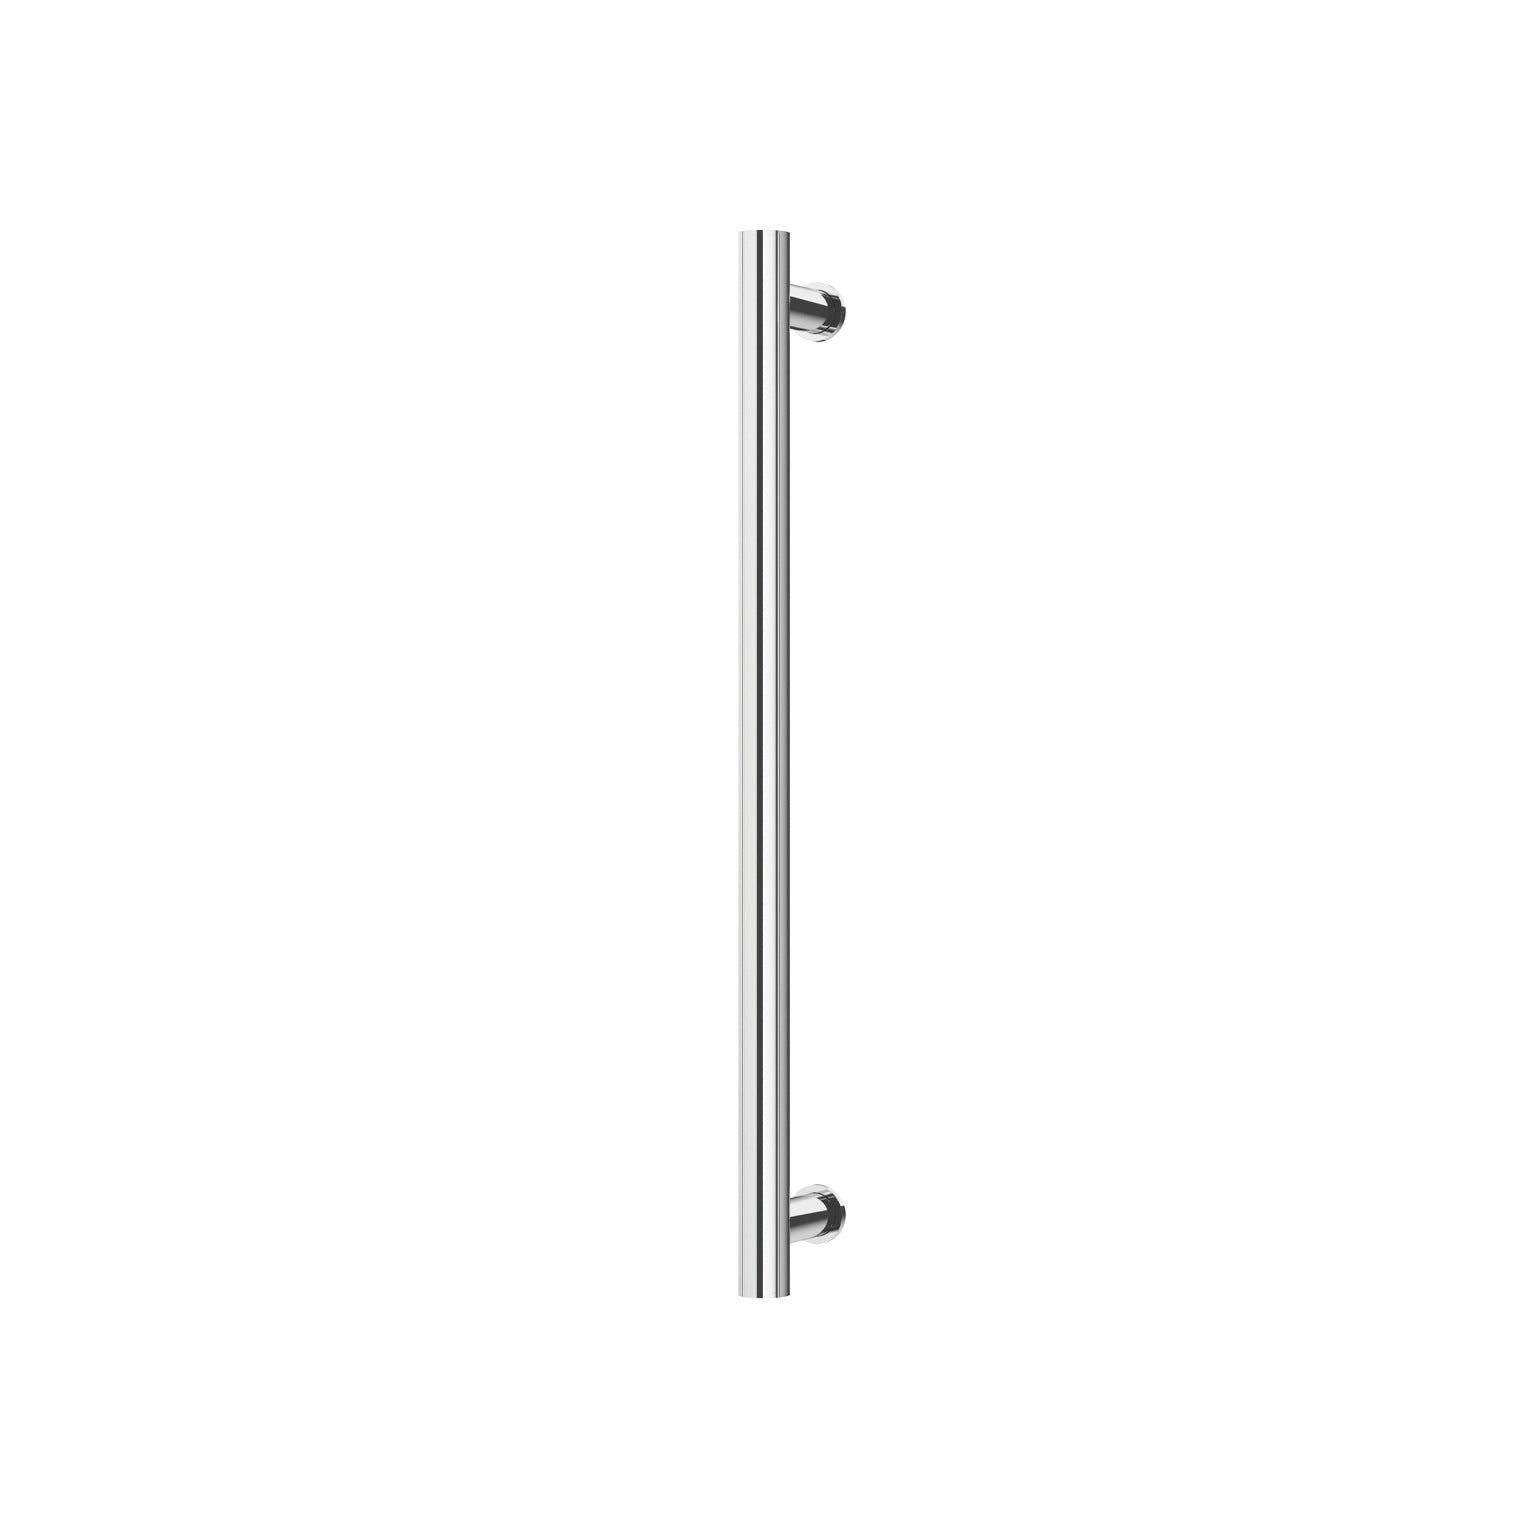 PHOENIX ROUND SINGLE HEATED TOWEL RAIL CHROME (AVAILABLE IN 600MM AND 800MM)